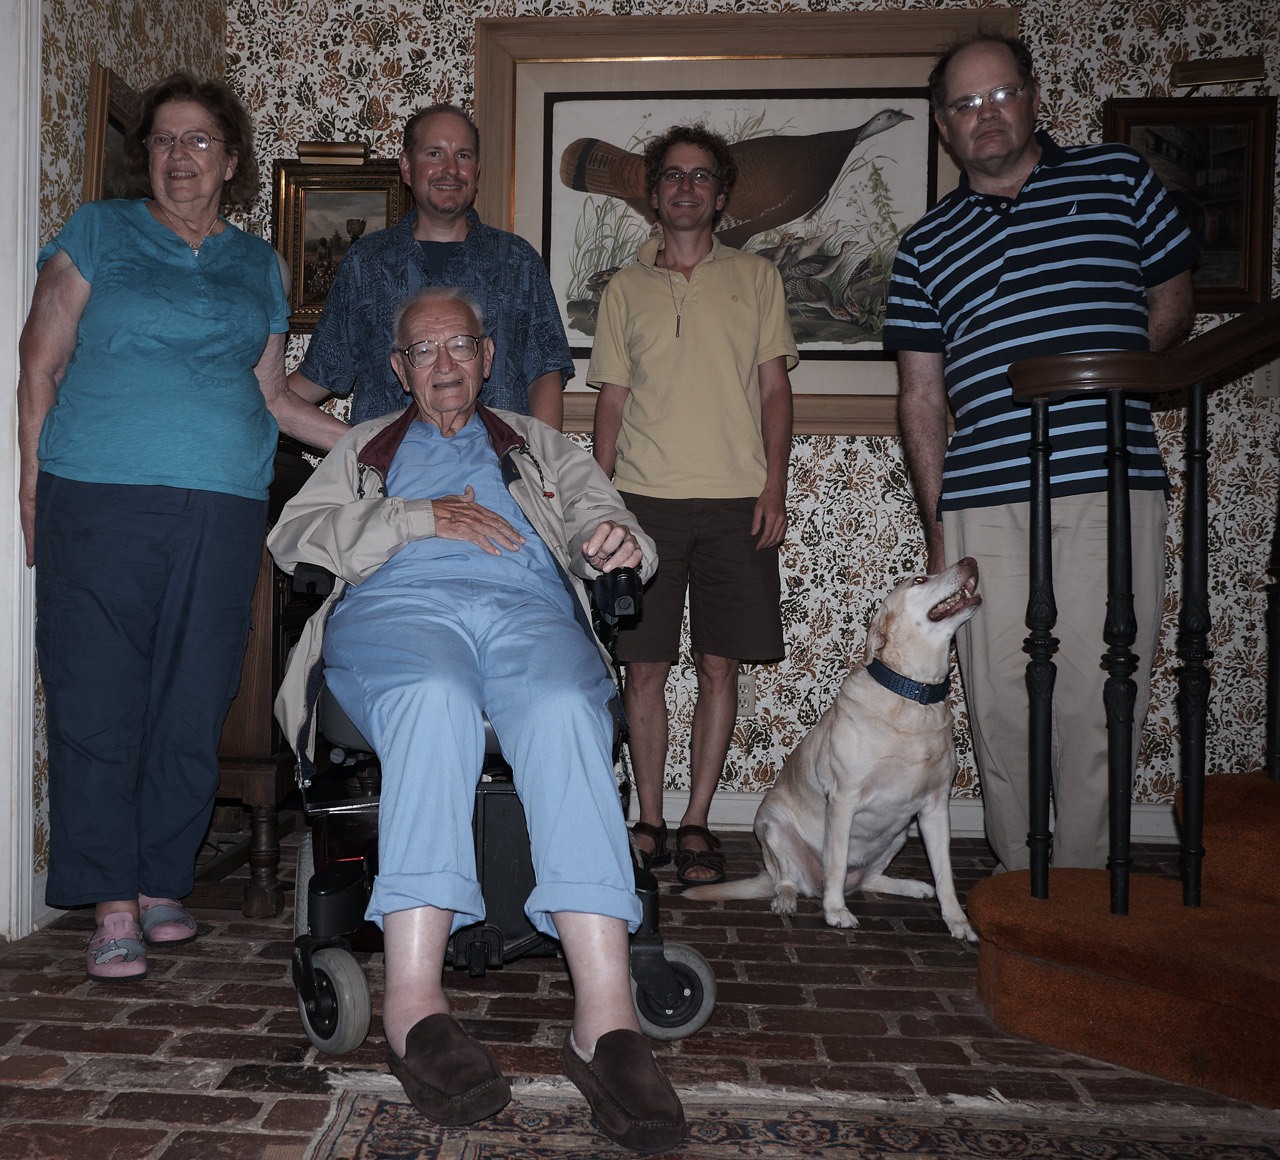 Aunt Nell and Uncle Norman, Marc, me, Charlie's dog Molly, and Charlie in Aunt Nell and Uncle Norman's foyer